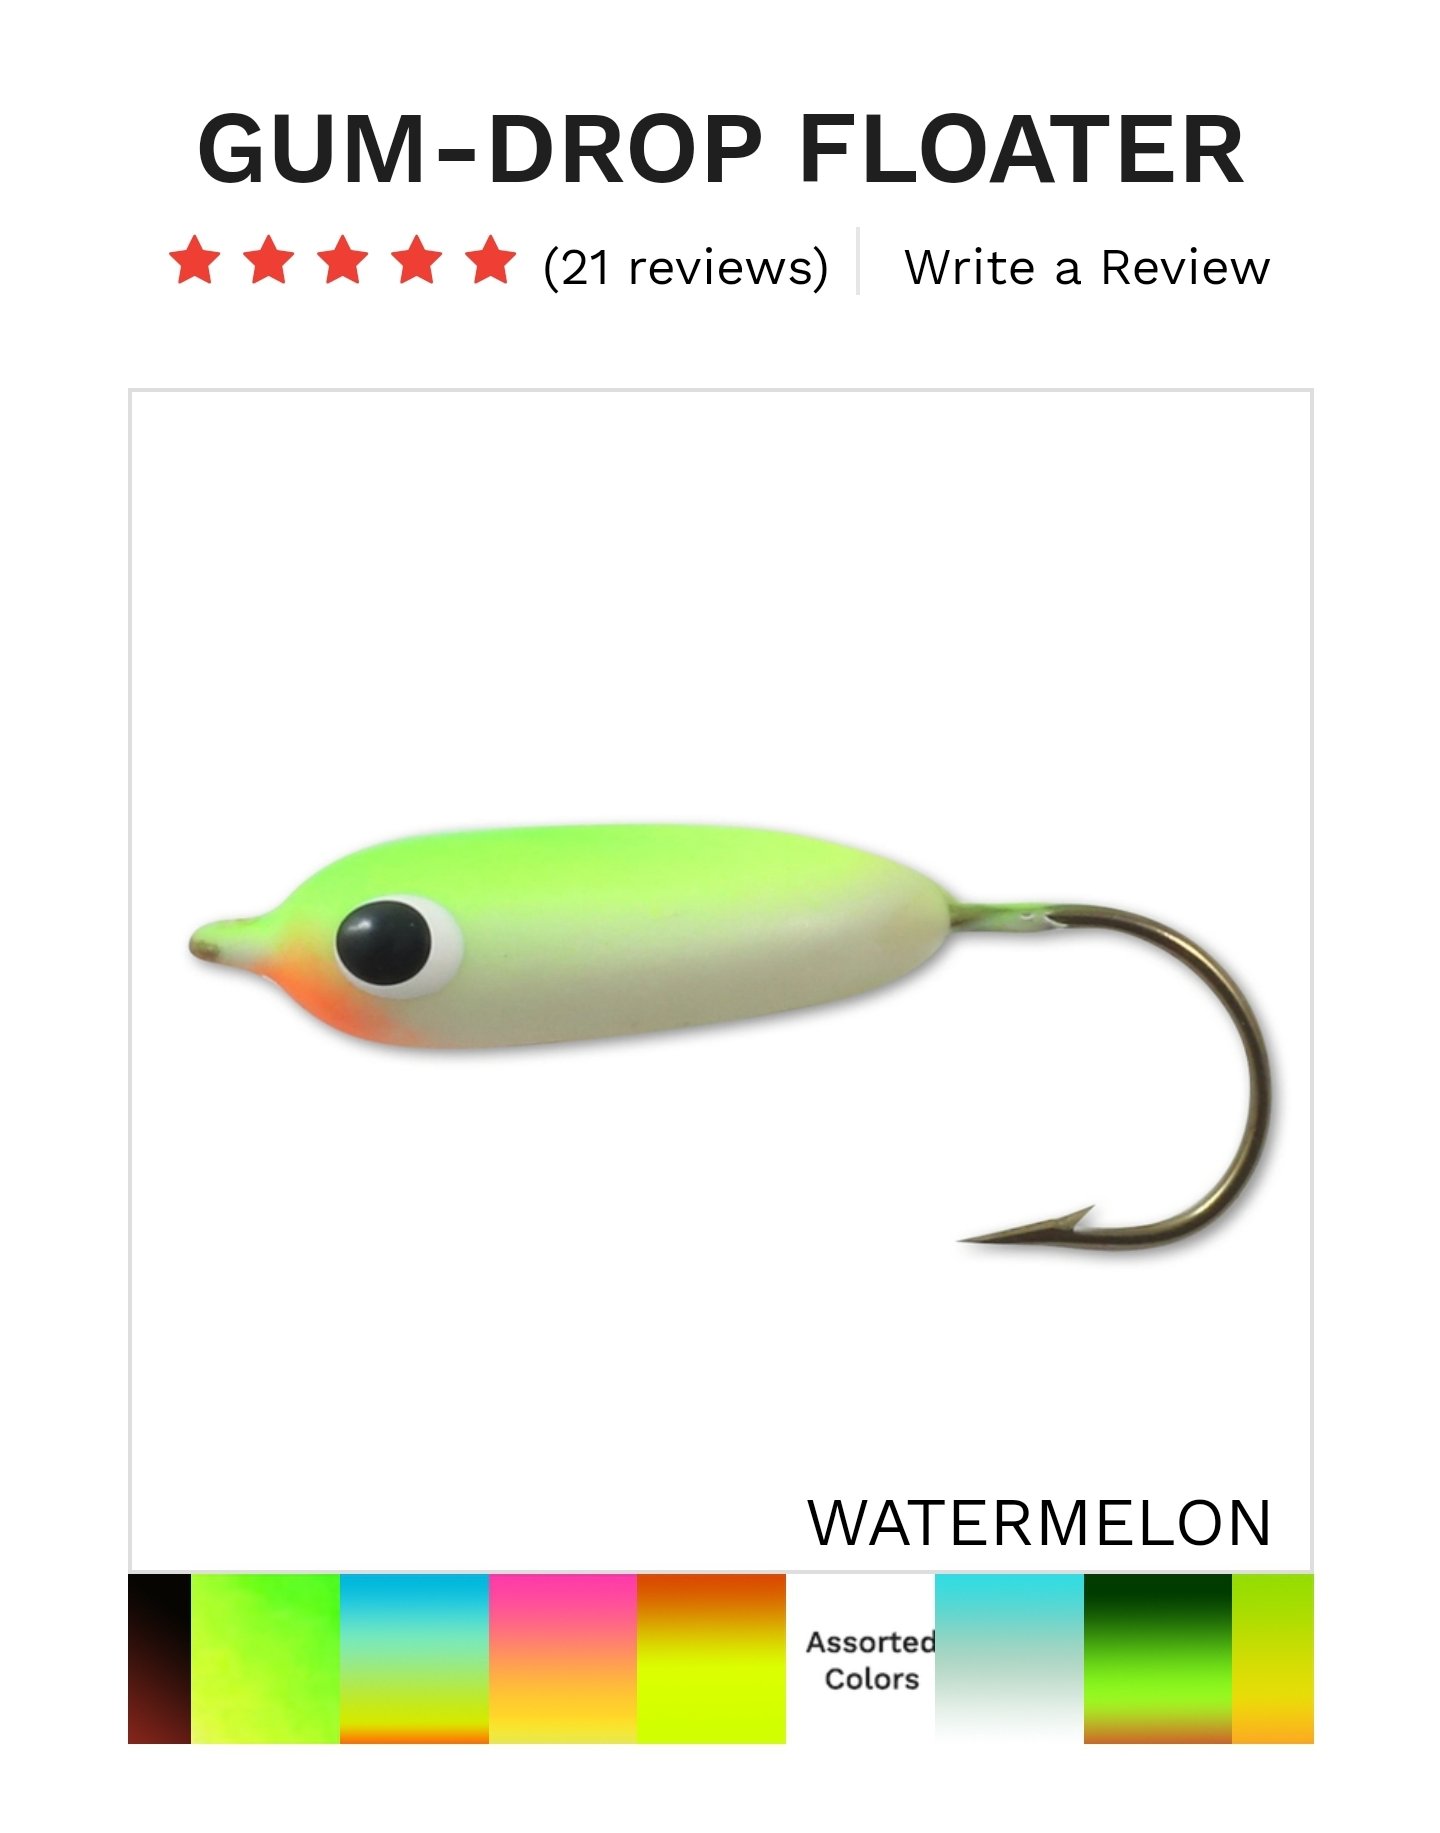 Has anyone tried Dropshotting, NED Rig, or Floating Jig when